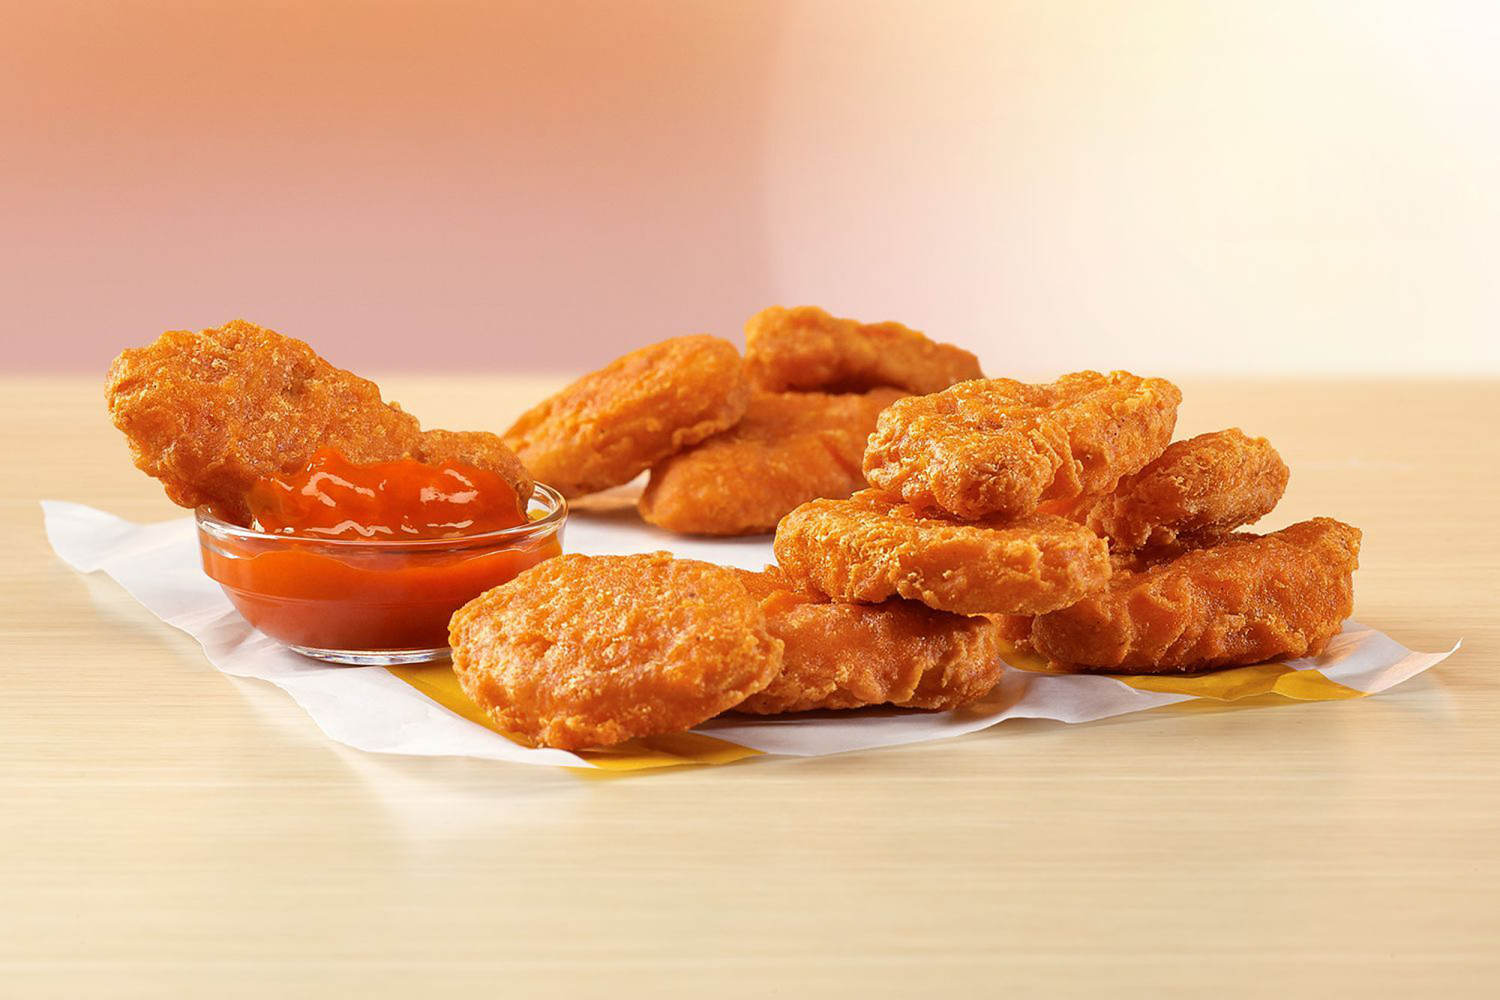 mcdonald’s spices up its menu with the return of fan-favorite item